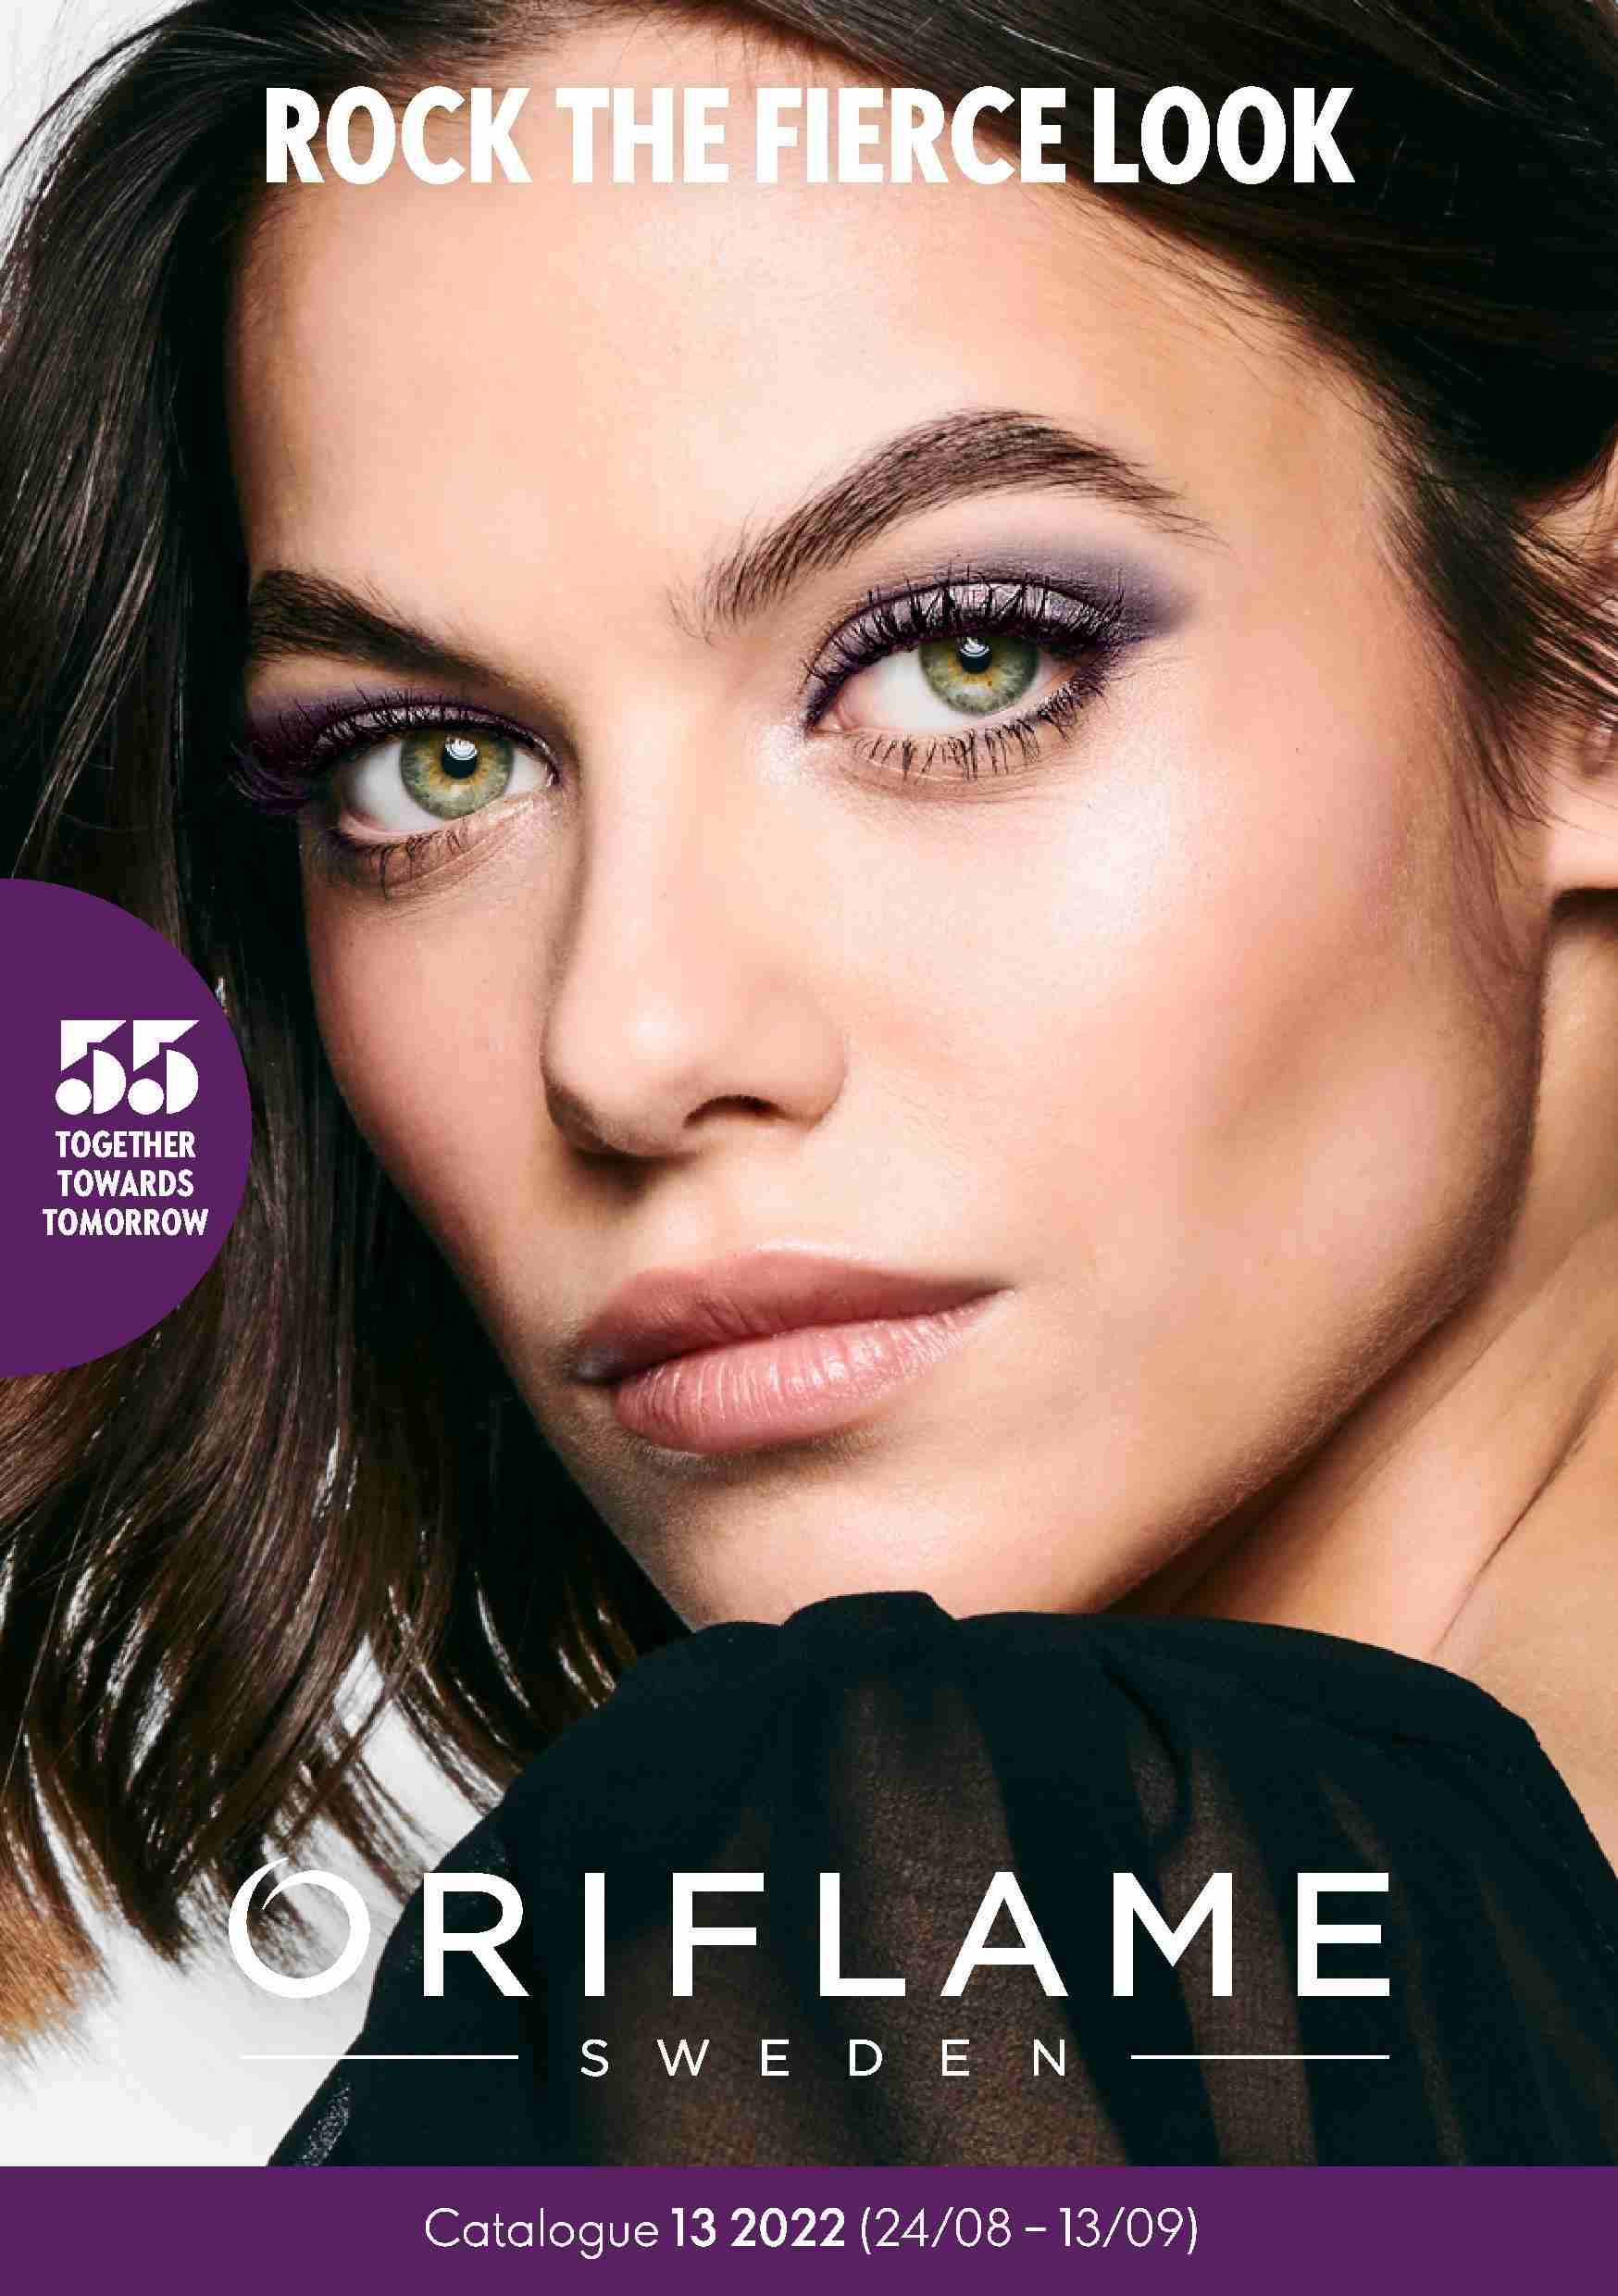 Oriflame Catalogue 13 2022 Oriflame Brochure Oriflame Products UK